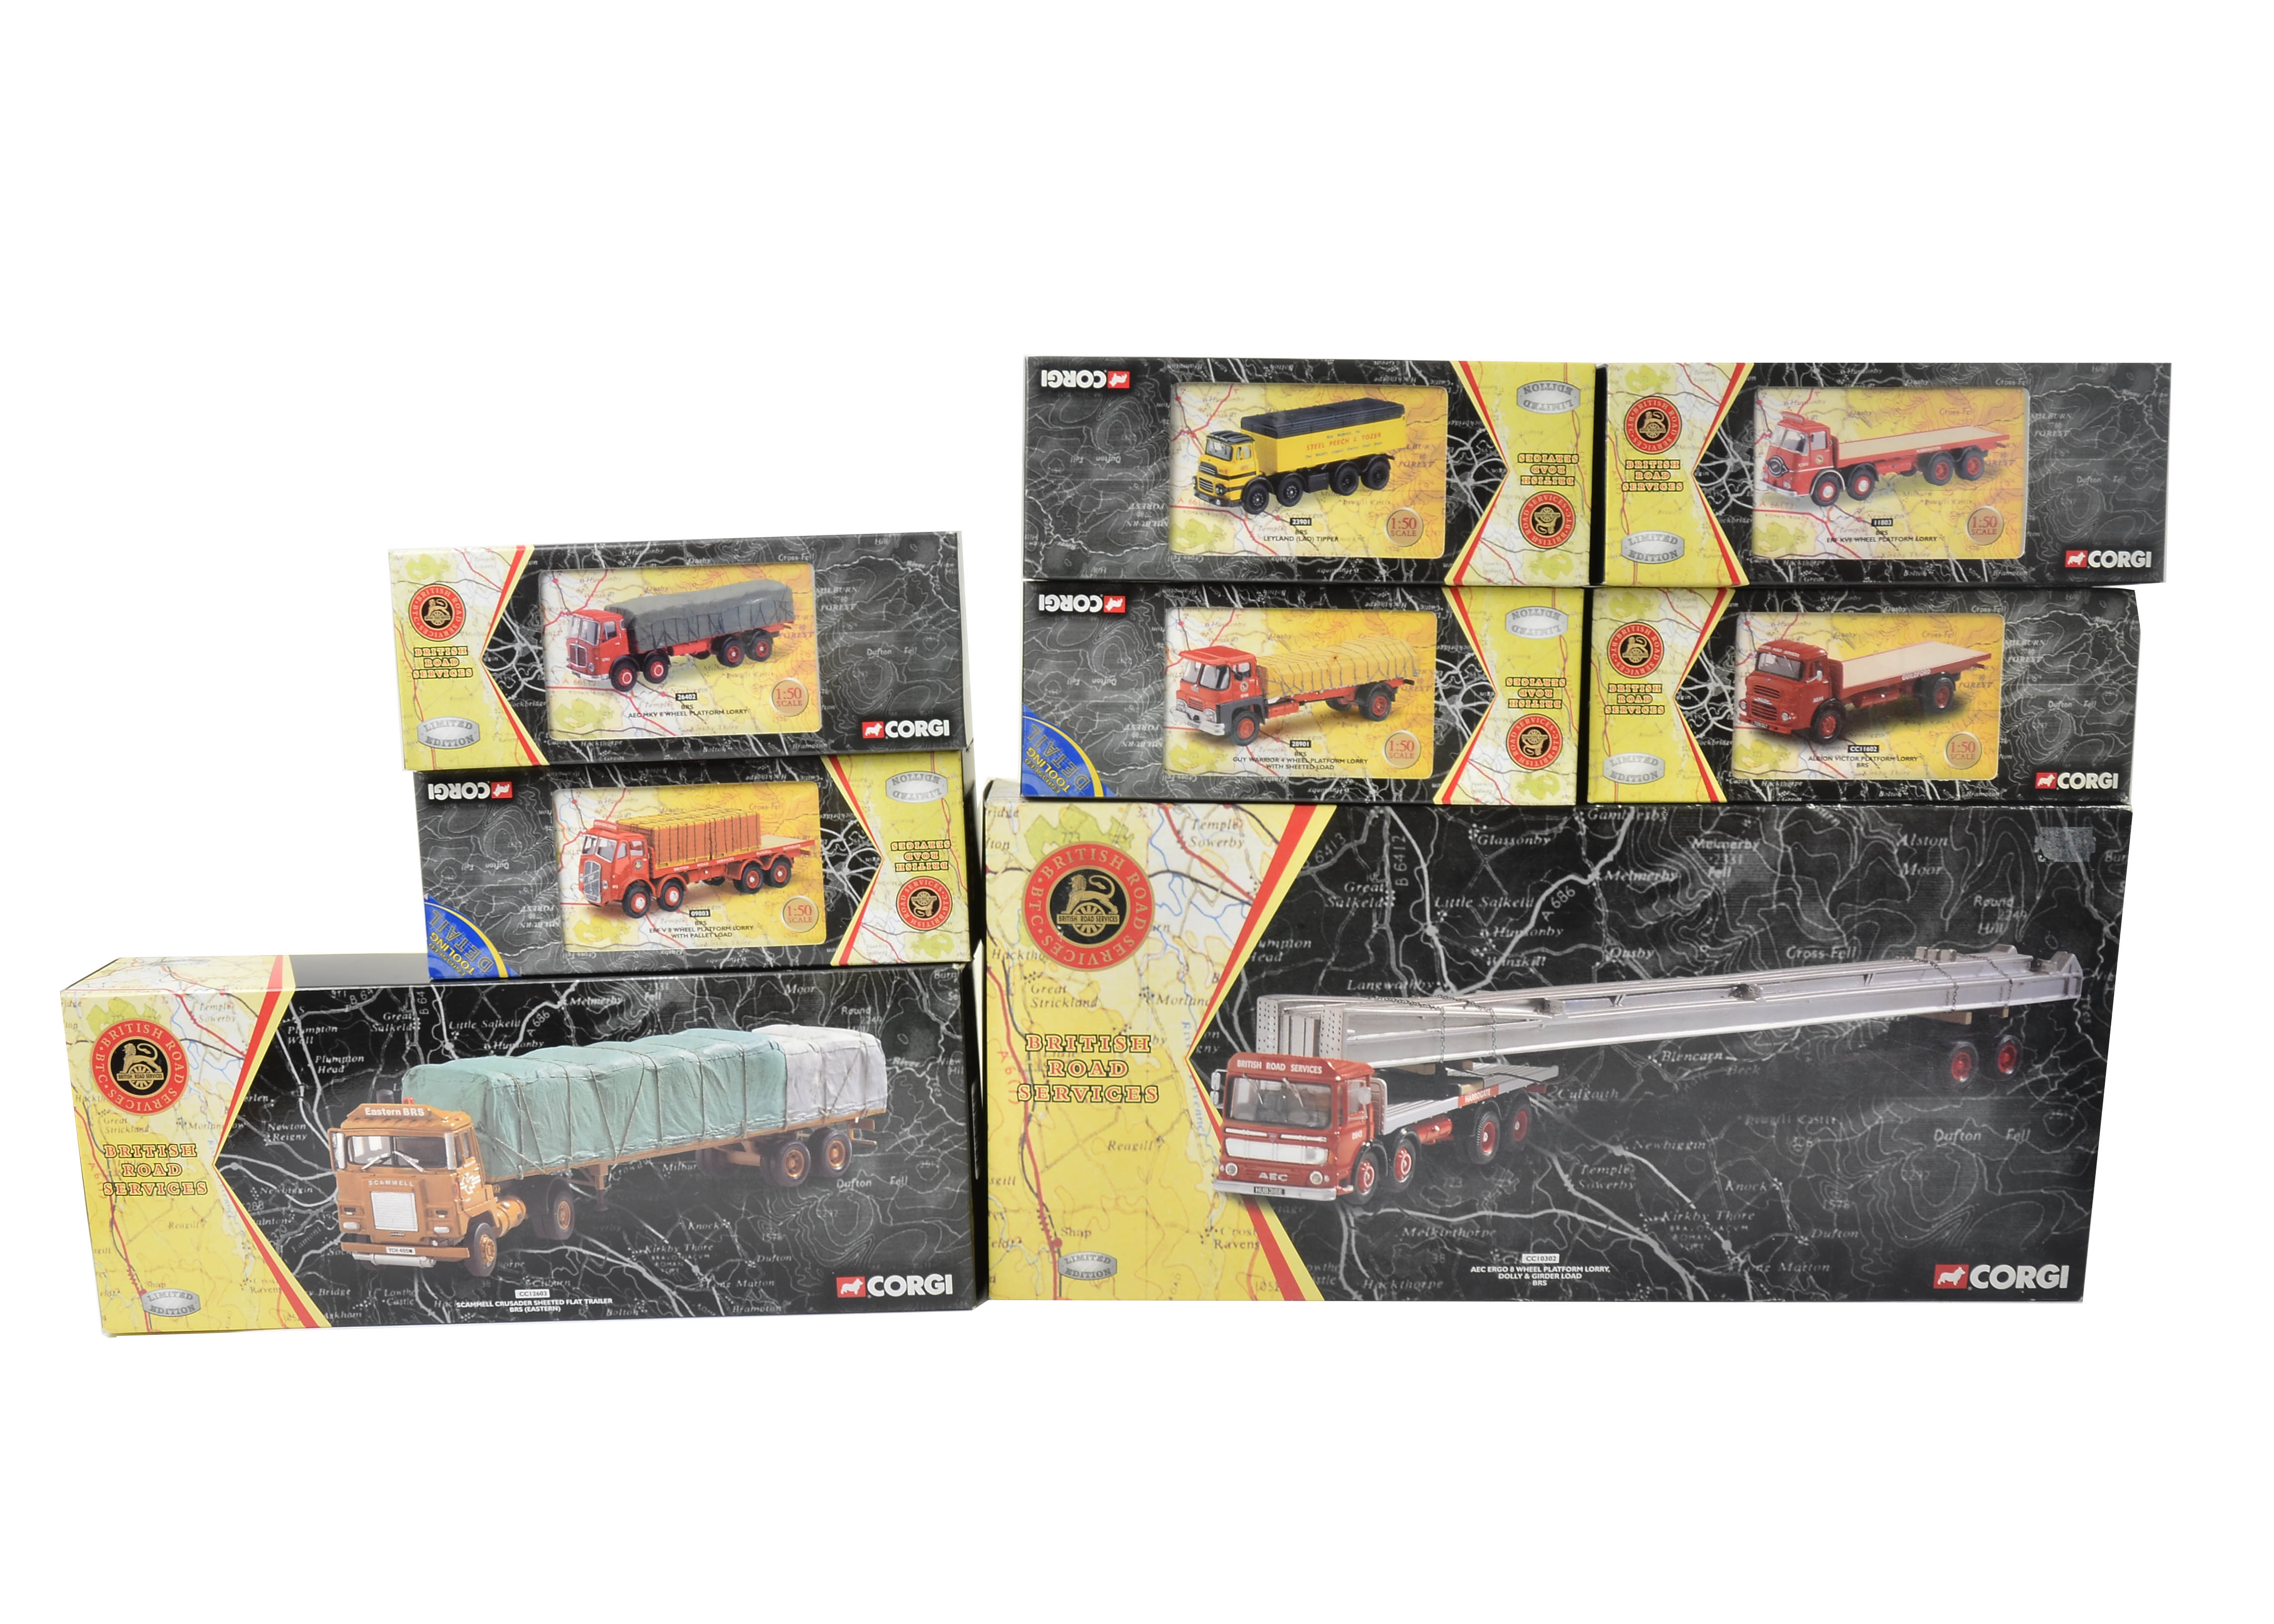 Corgi British Road Services Haulage Vehicles, a boxed collection of 1:50 scale models all limited